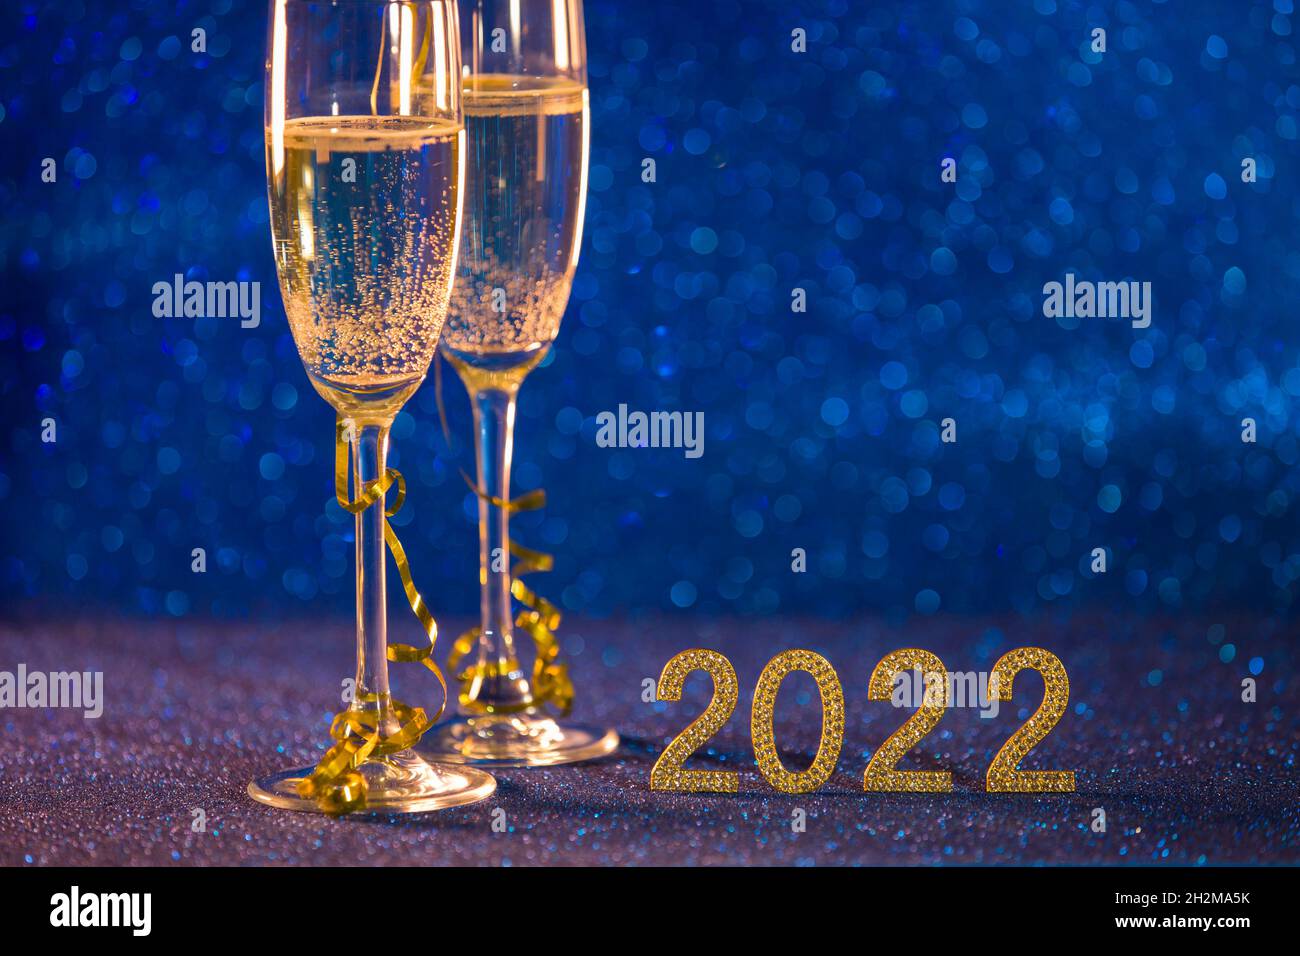 Happy new year 2022. Christmas and New Year holiday background with two cups, a glass of champagne and a blue bokeh effect background. Stock Photo